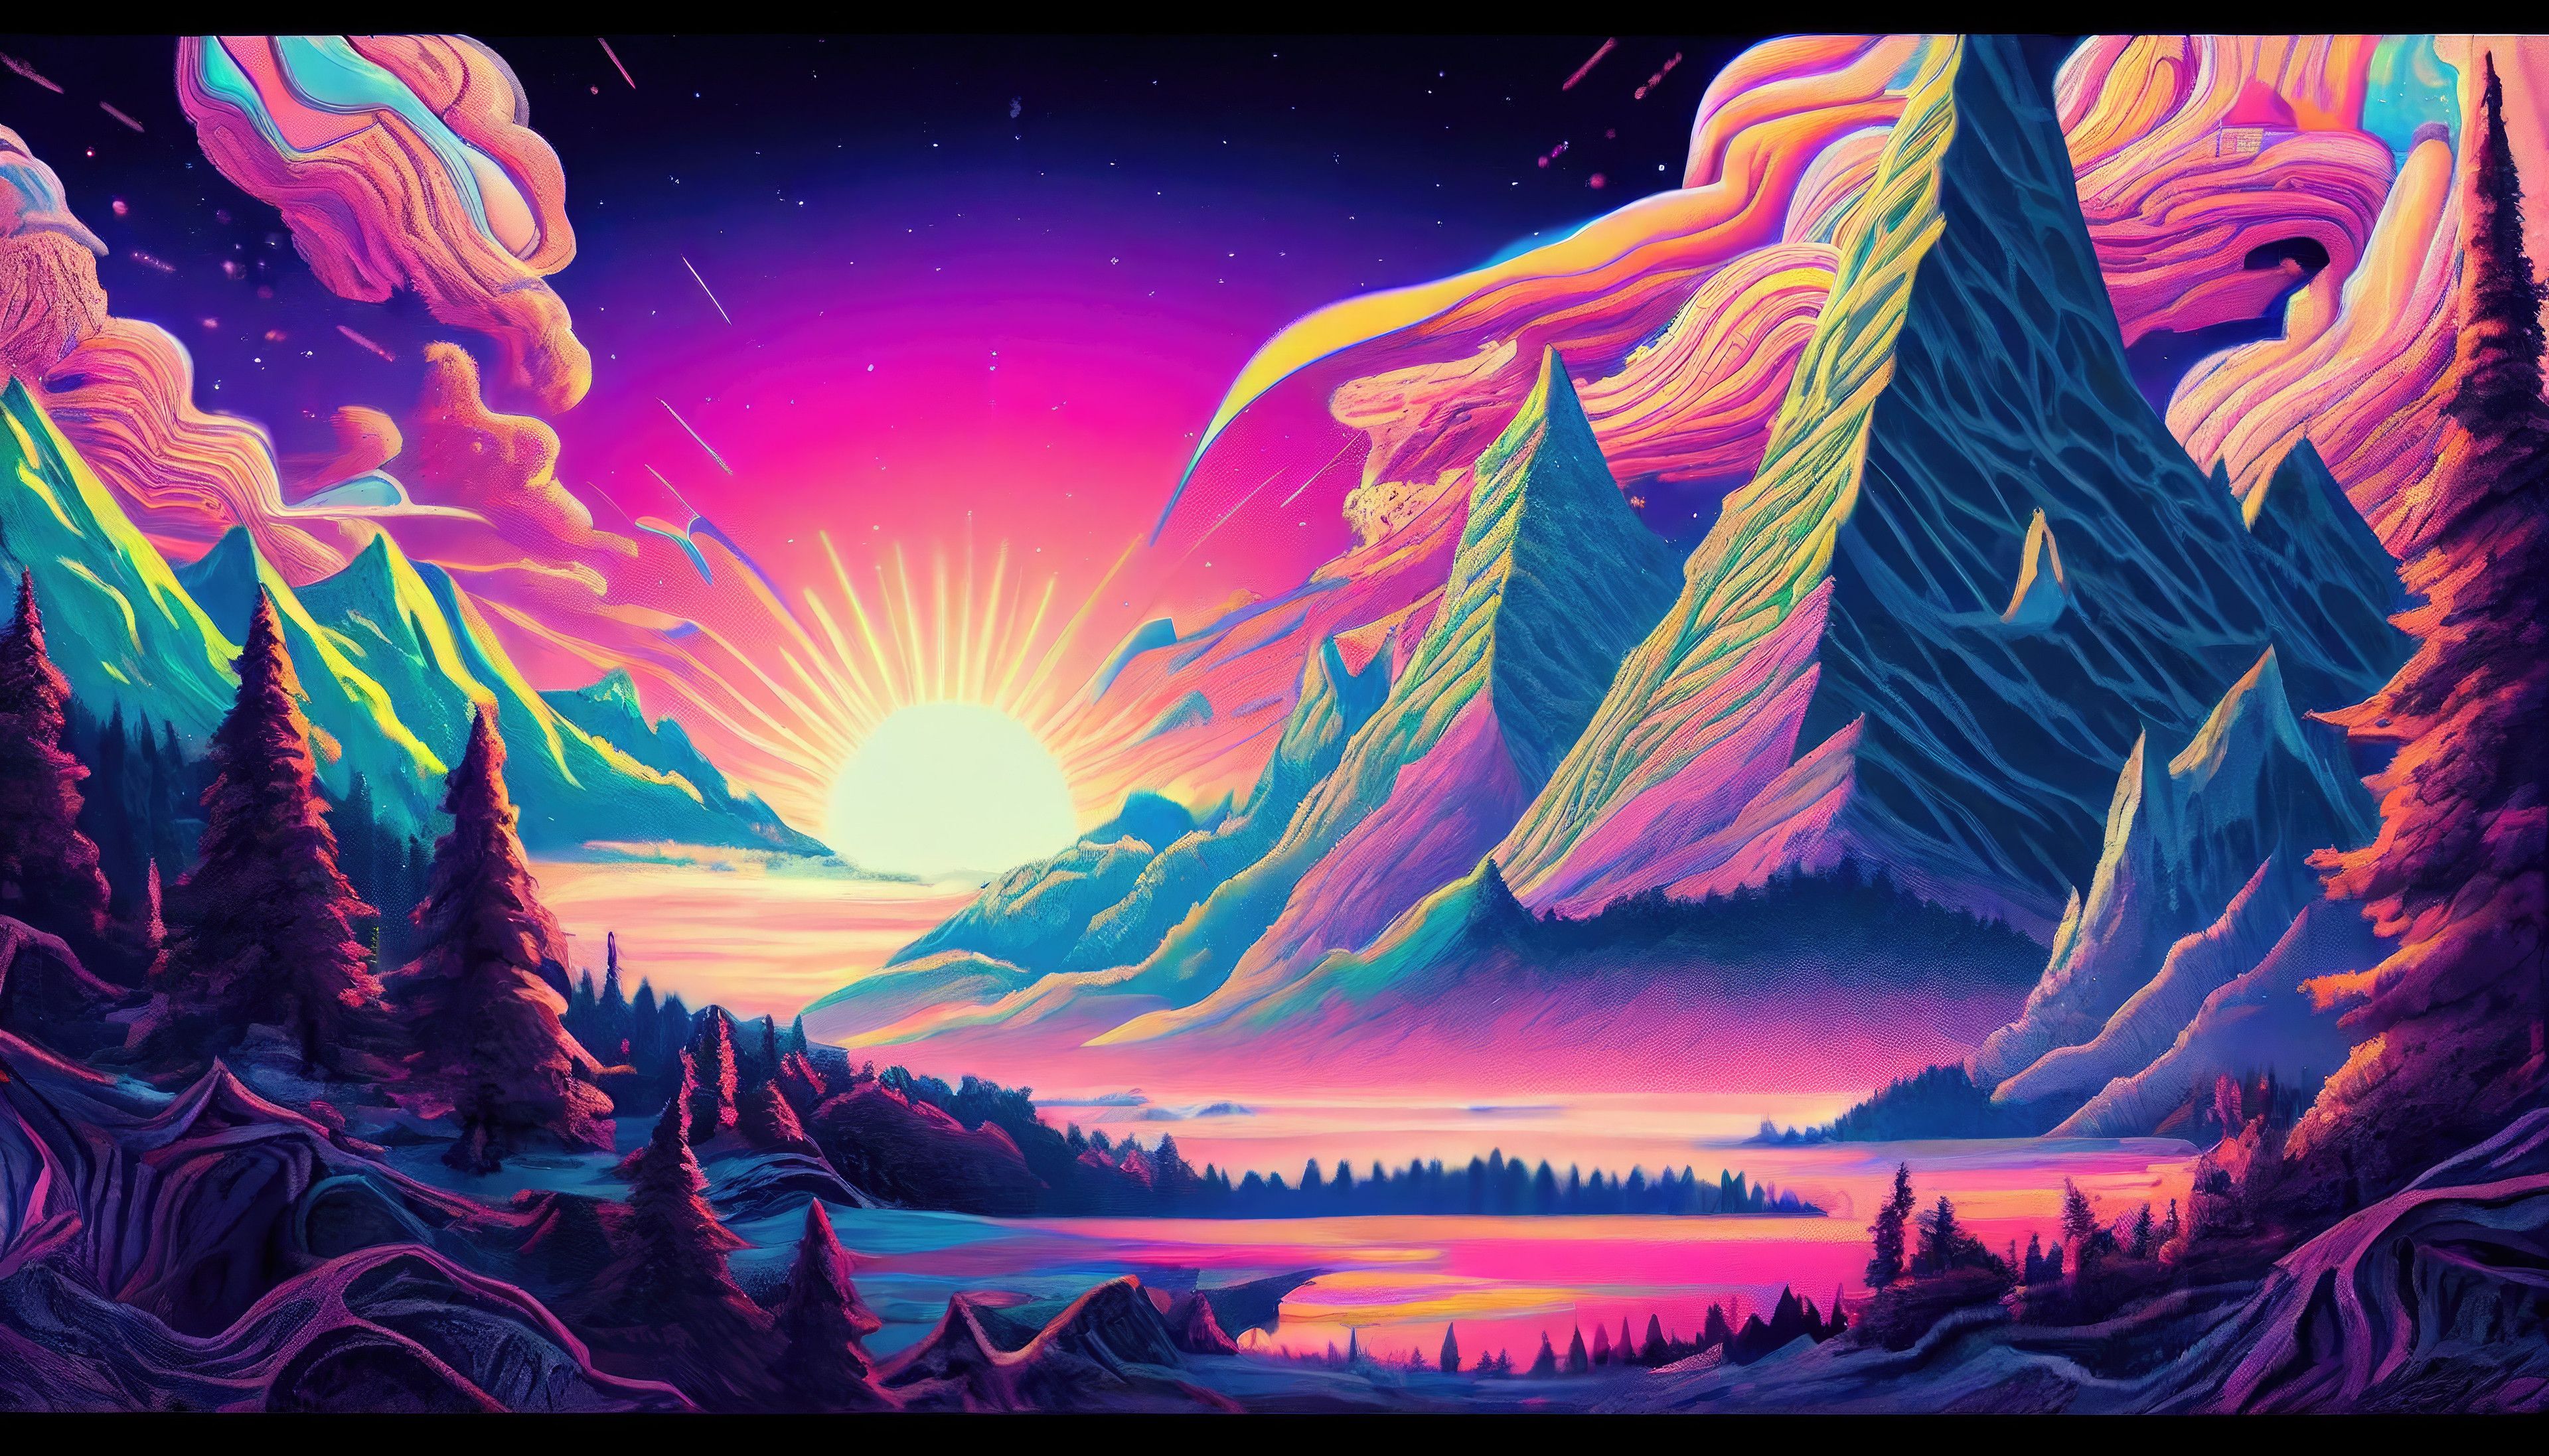 A colorful and artistic landscape of mountains and trees - Weirdcore